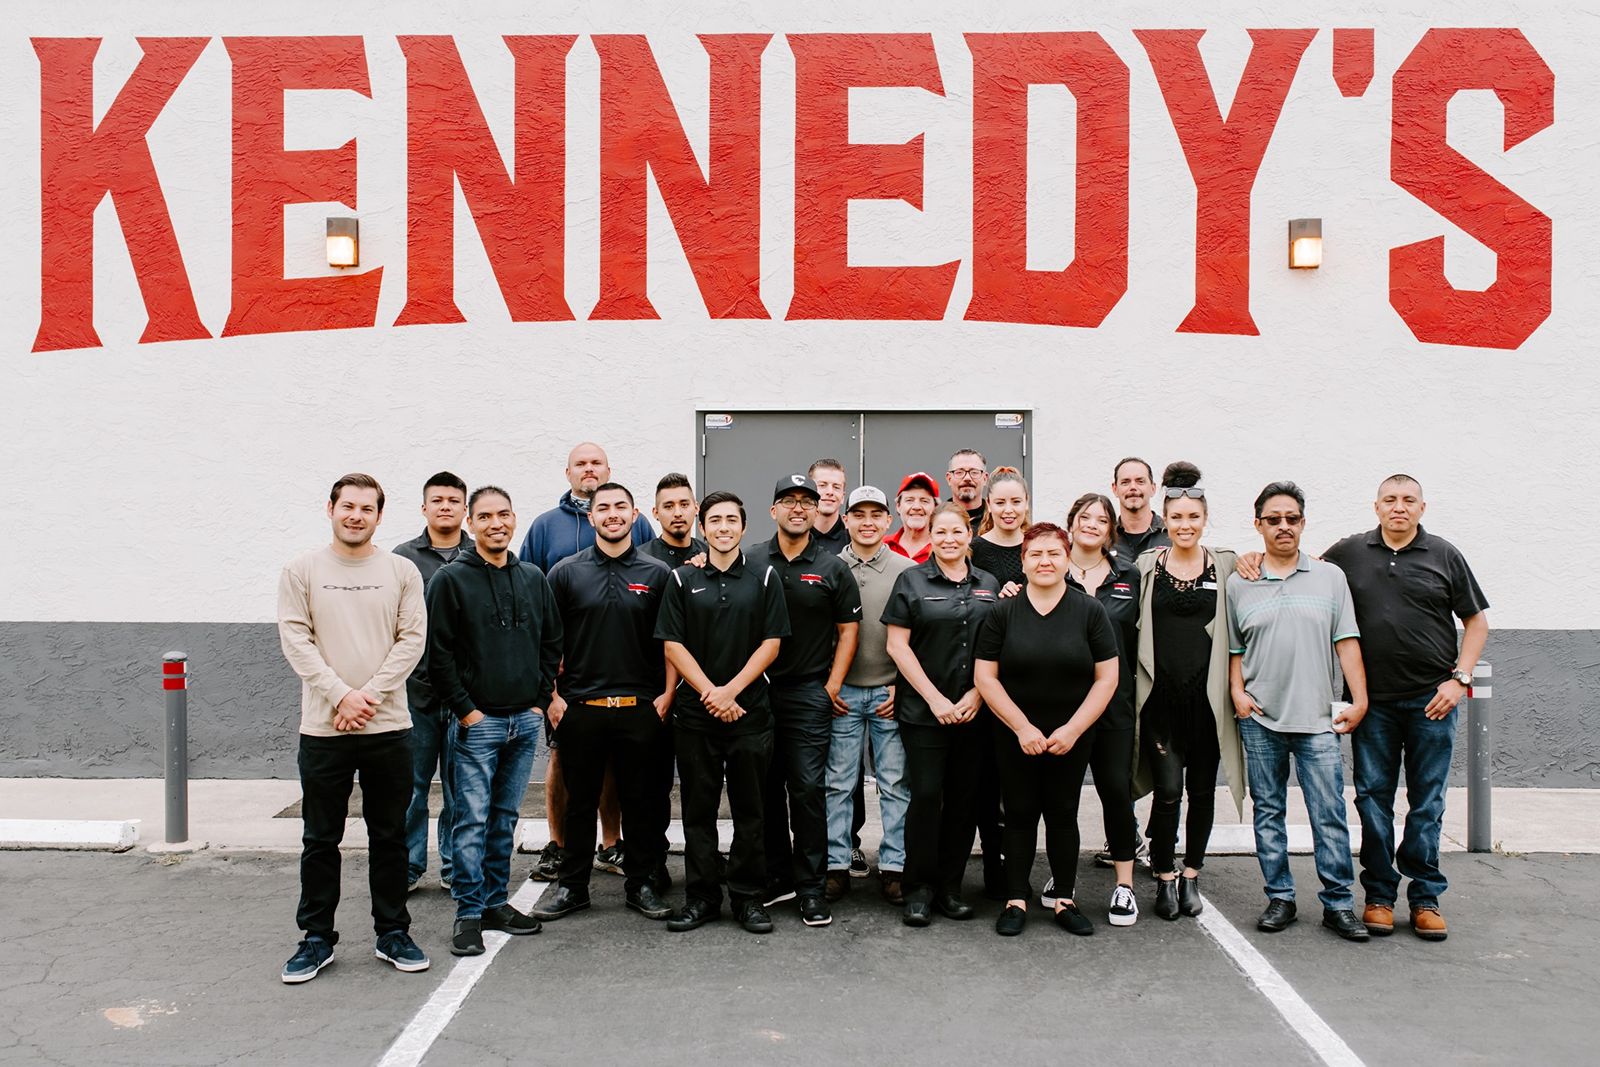 Kennedy's Meat Company Announces New Location in Temecula